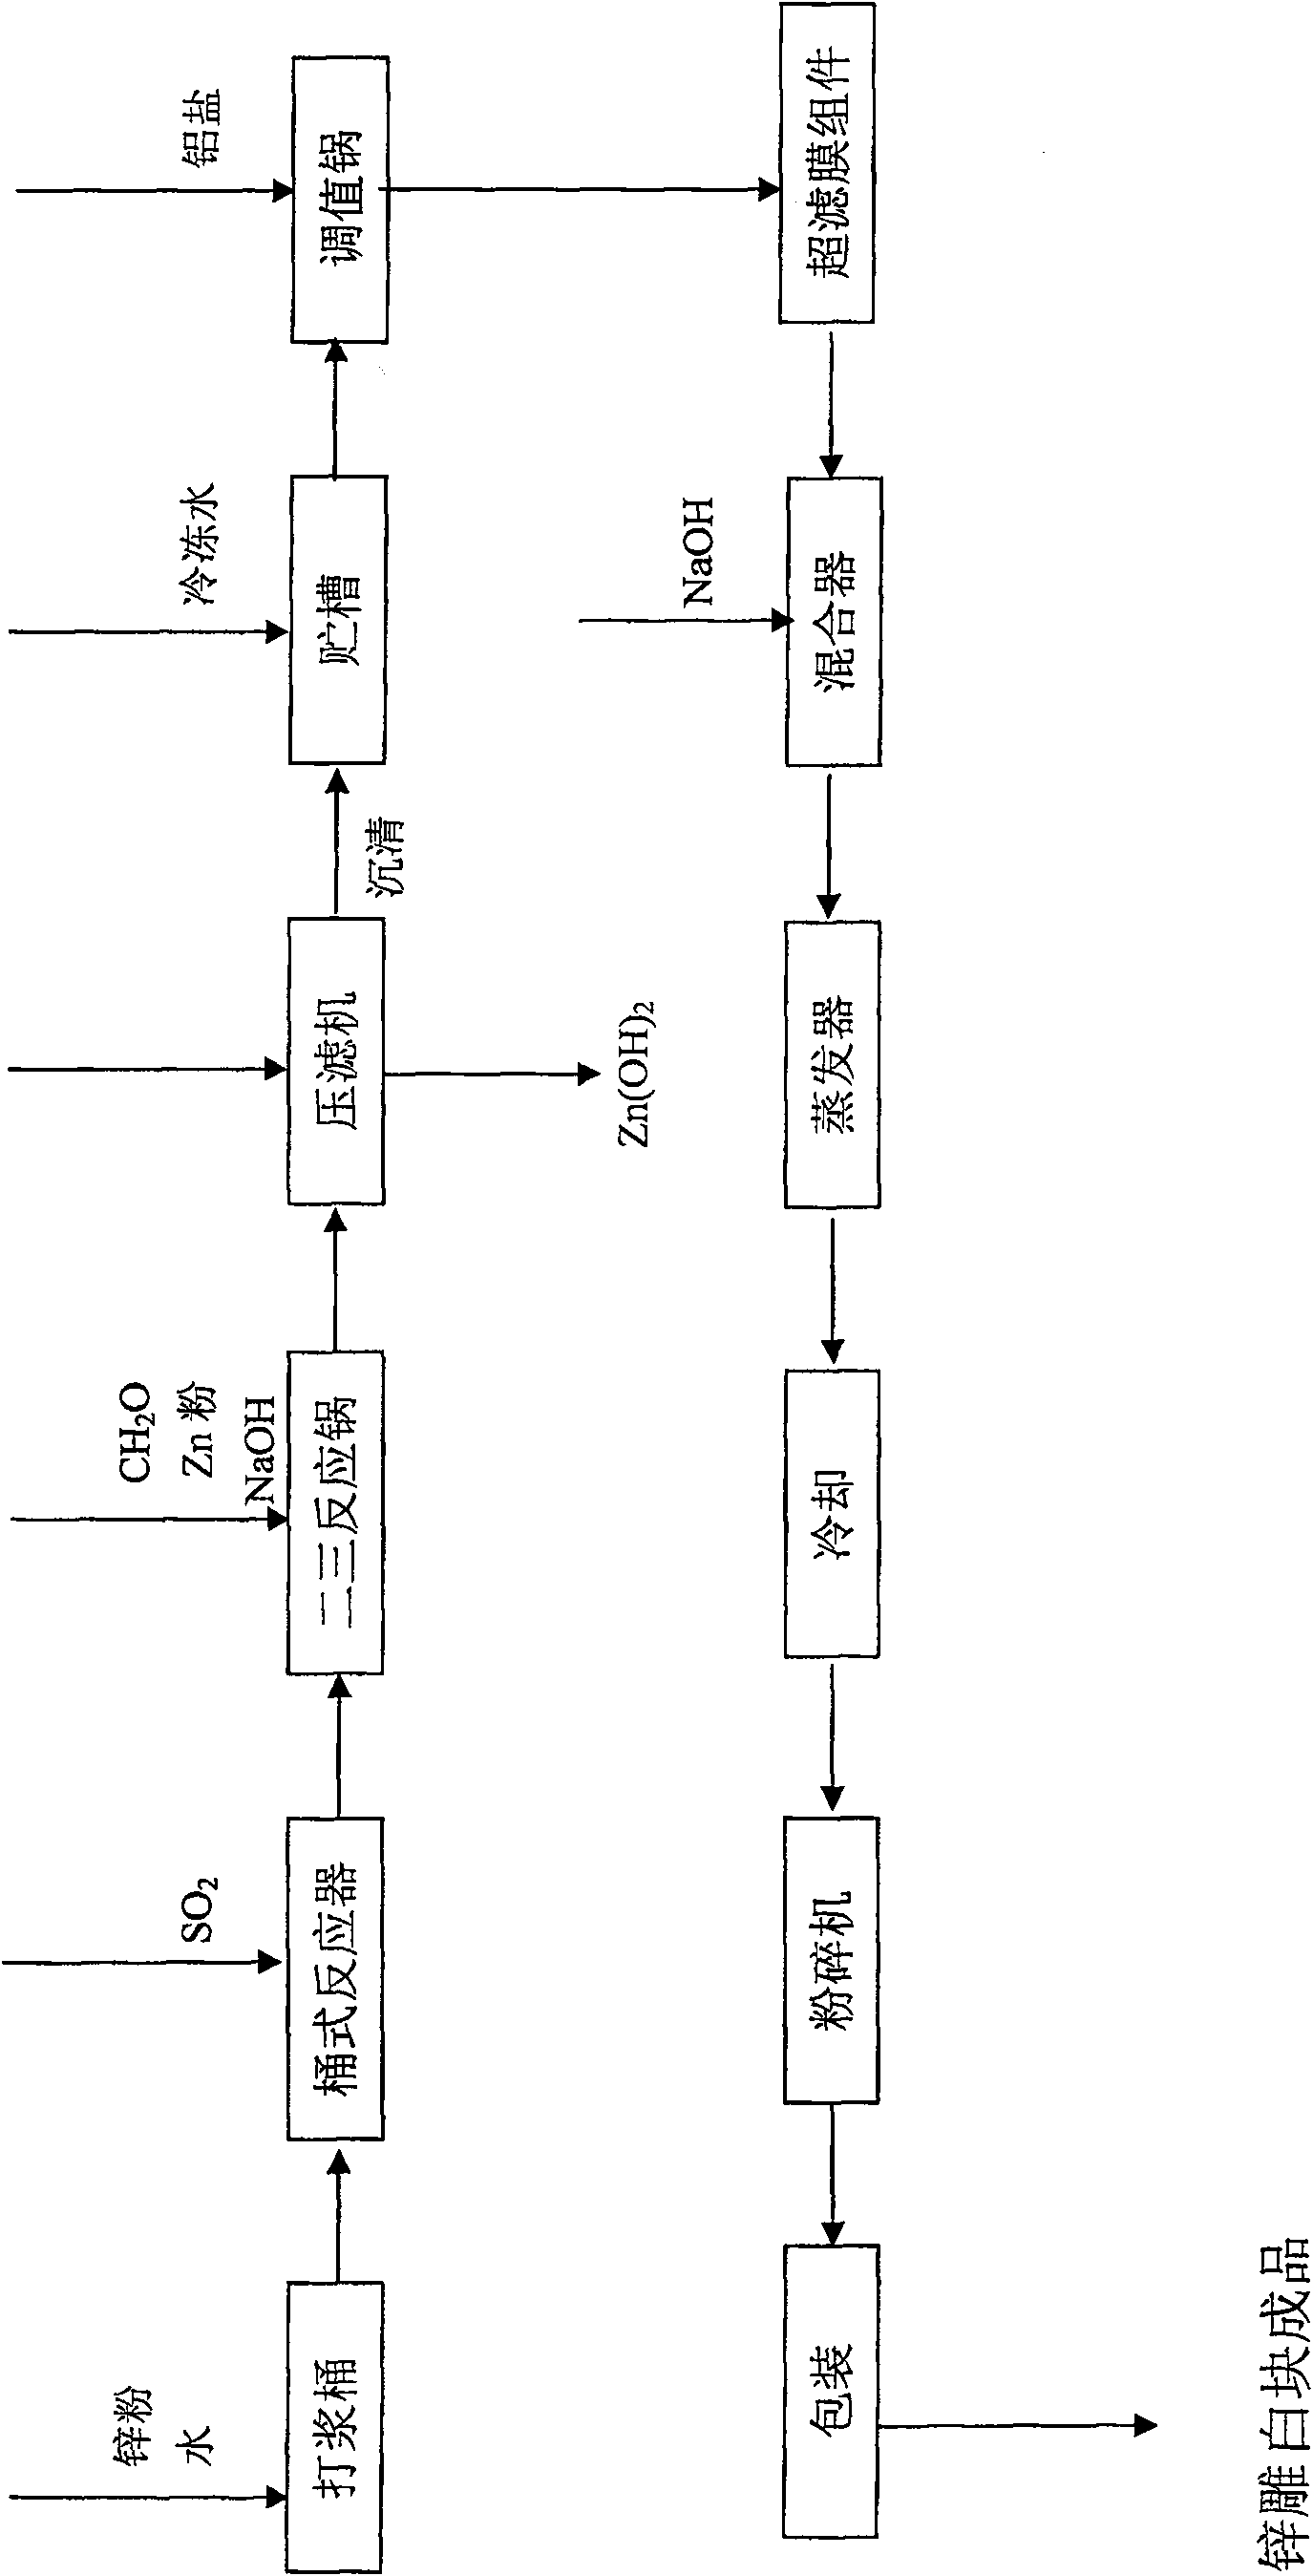 Method for producing rongalite with low zinc